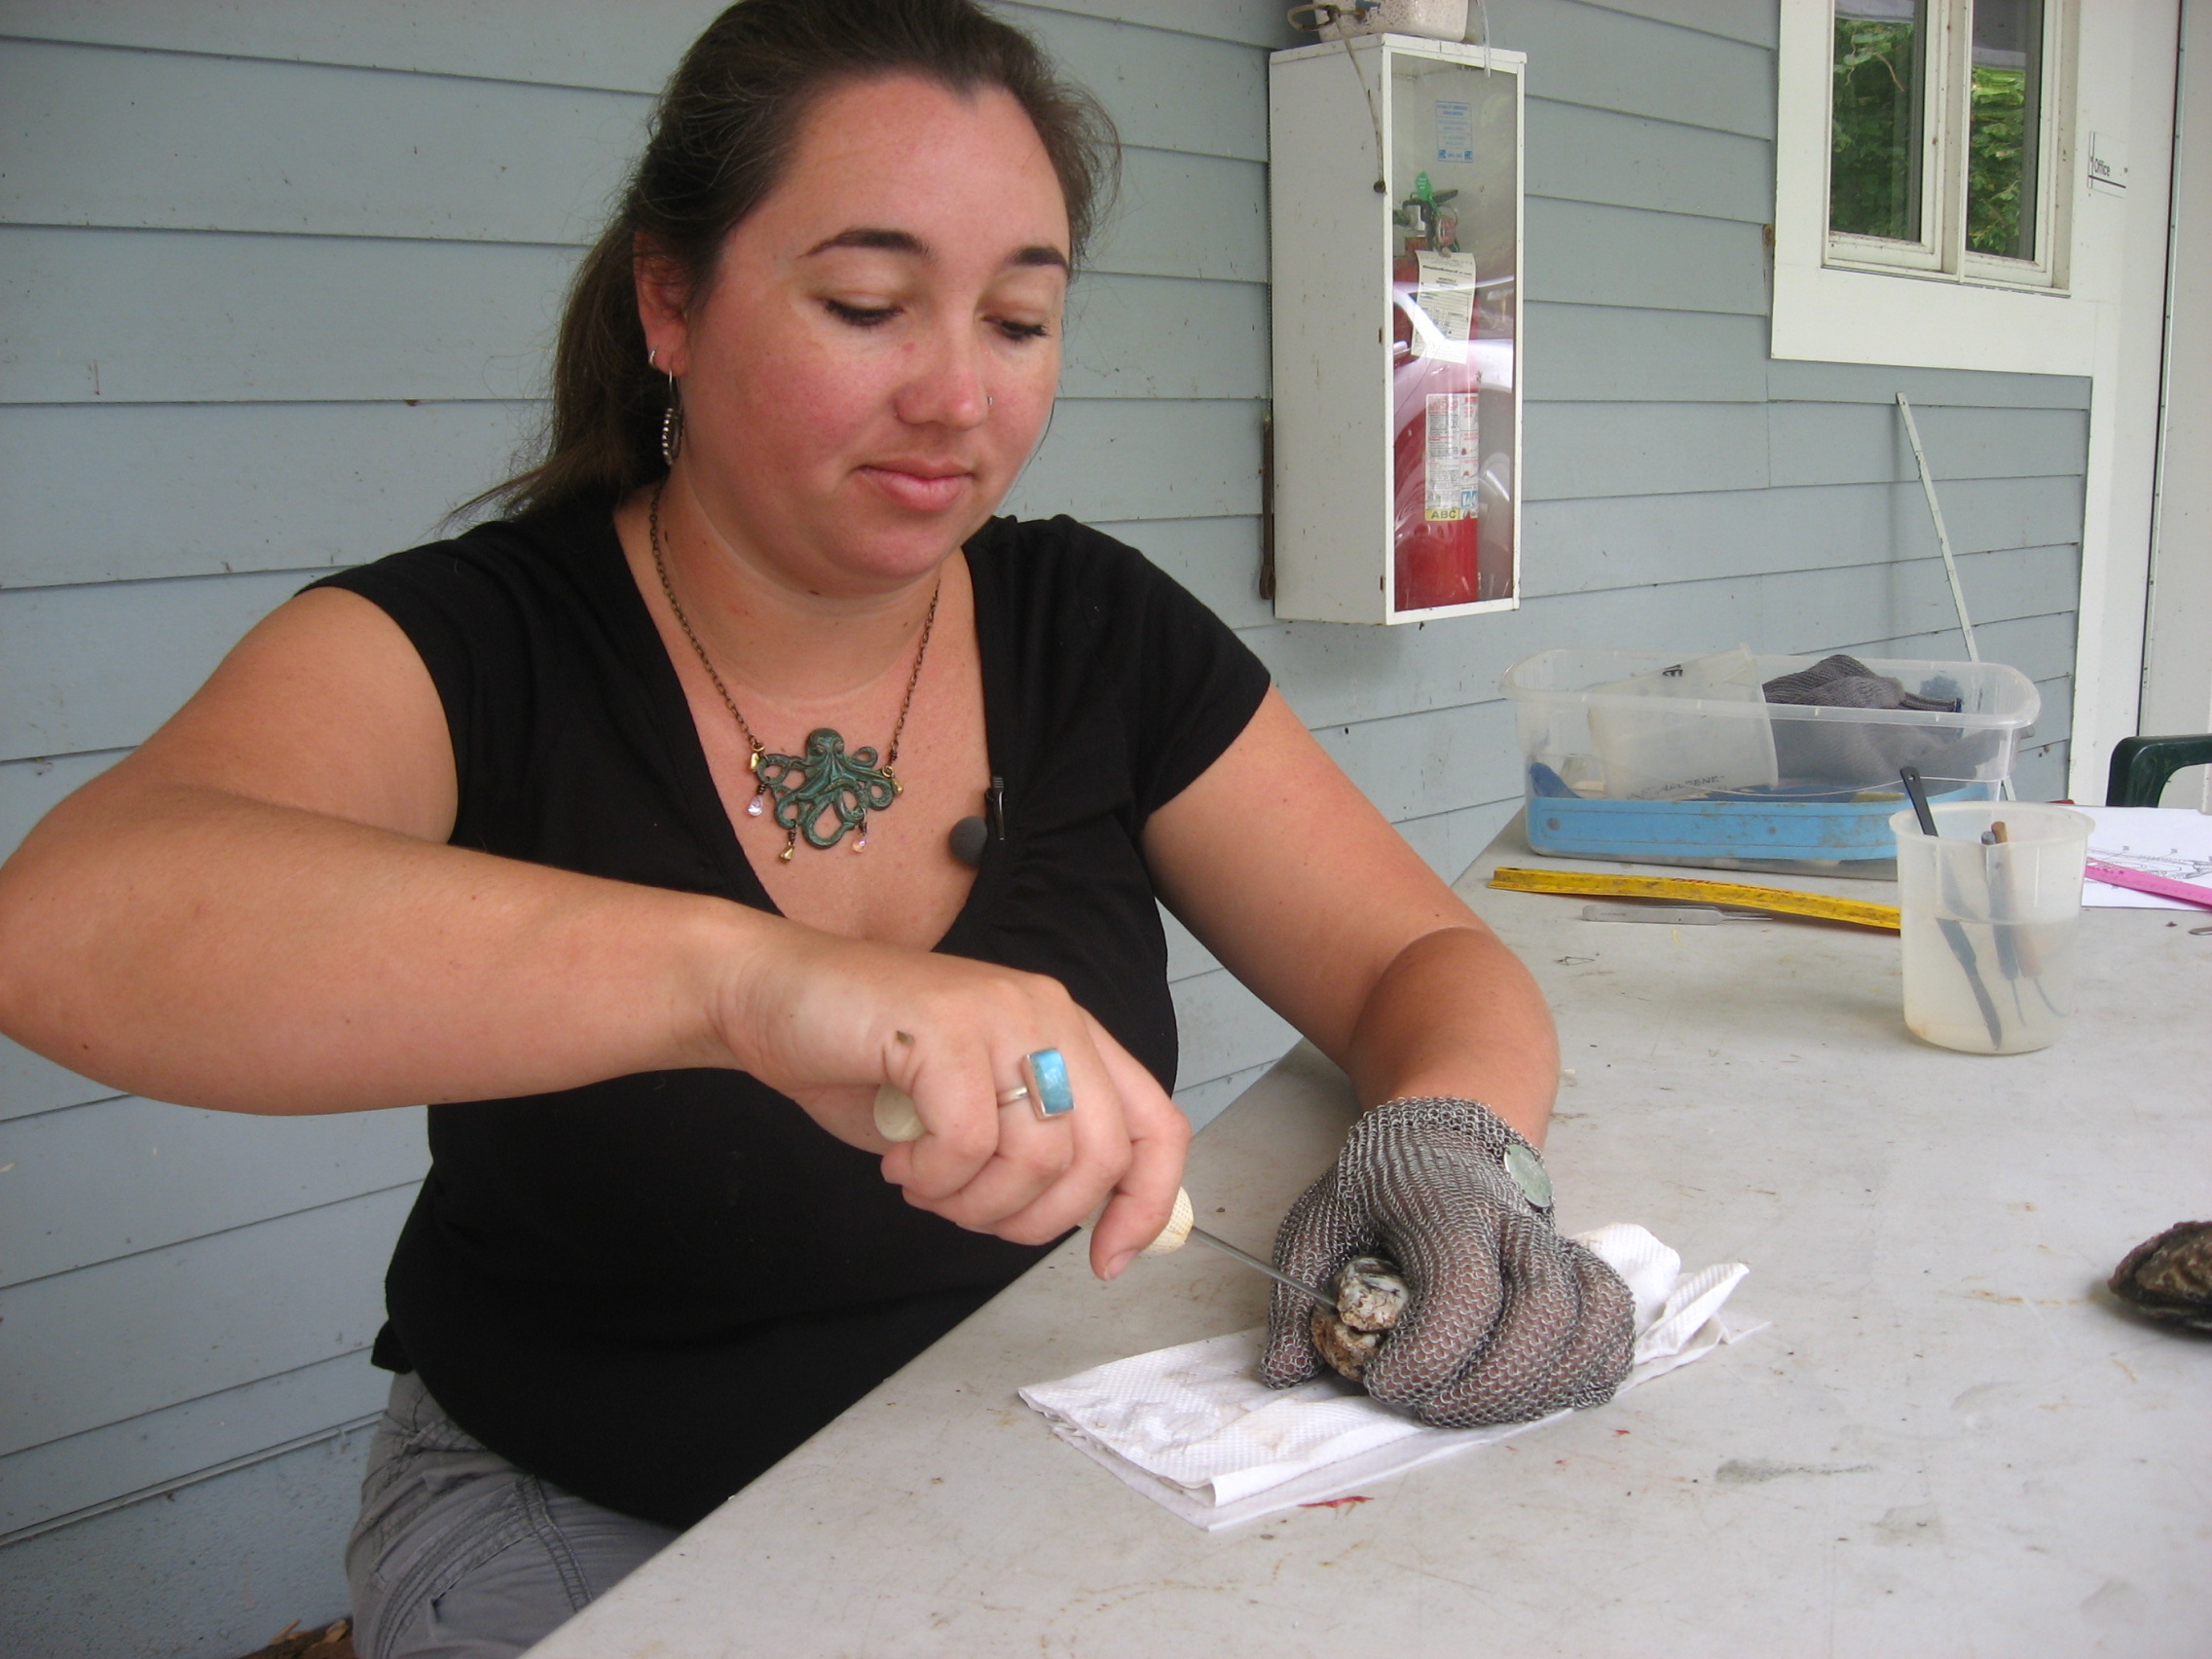 Rebecca Burrell dissects an oyster.